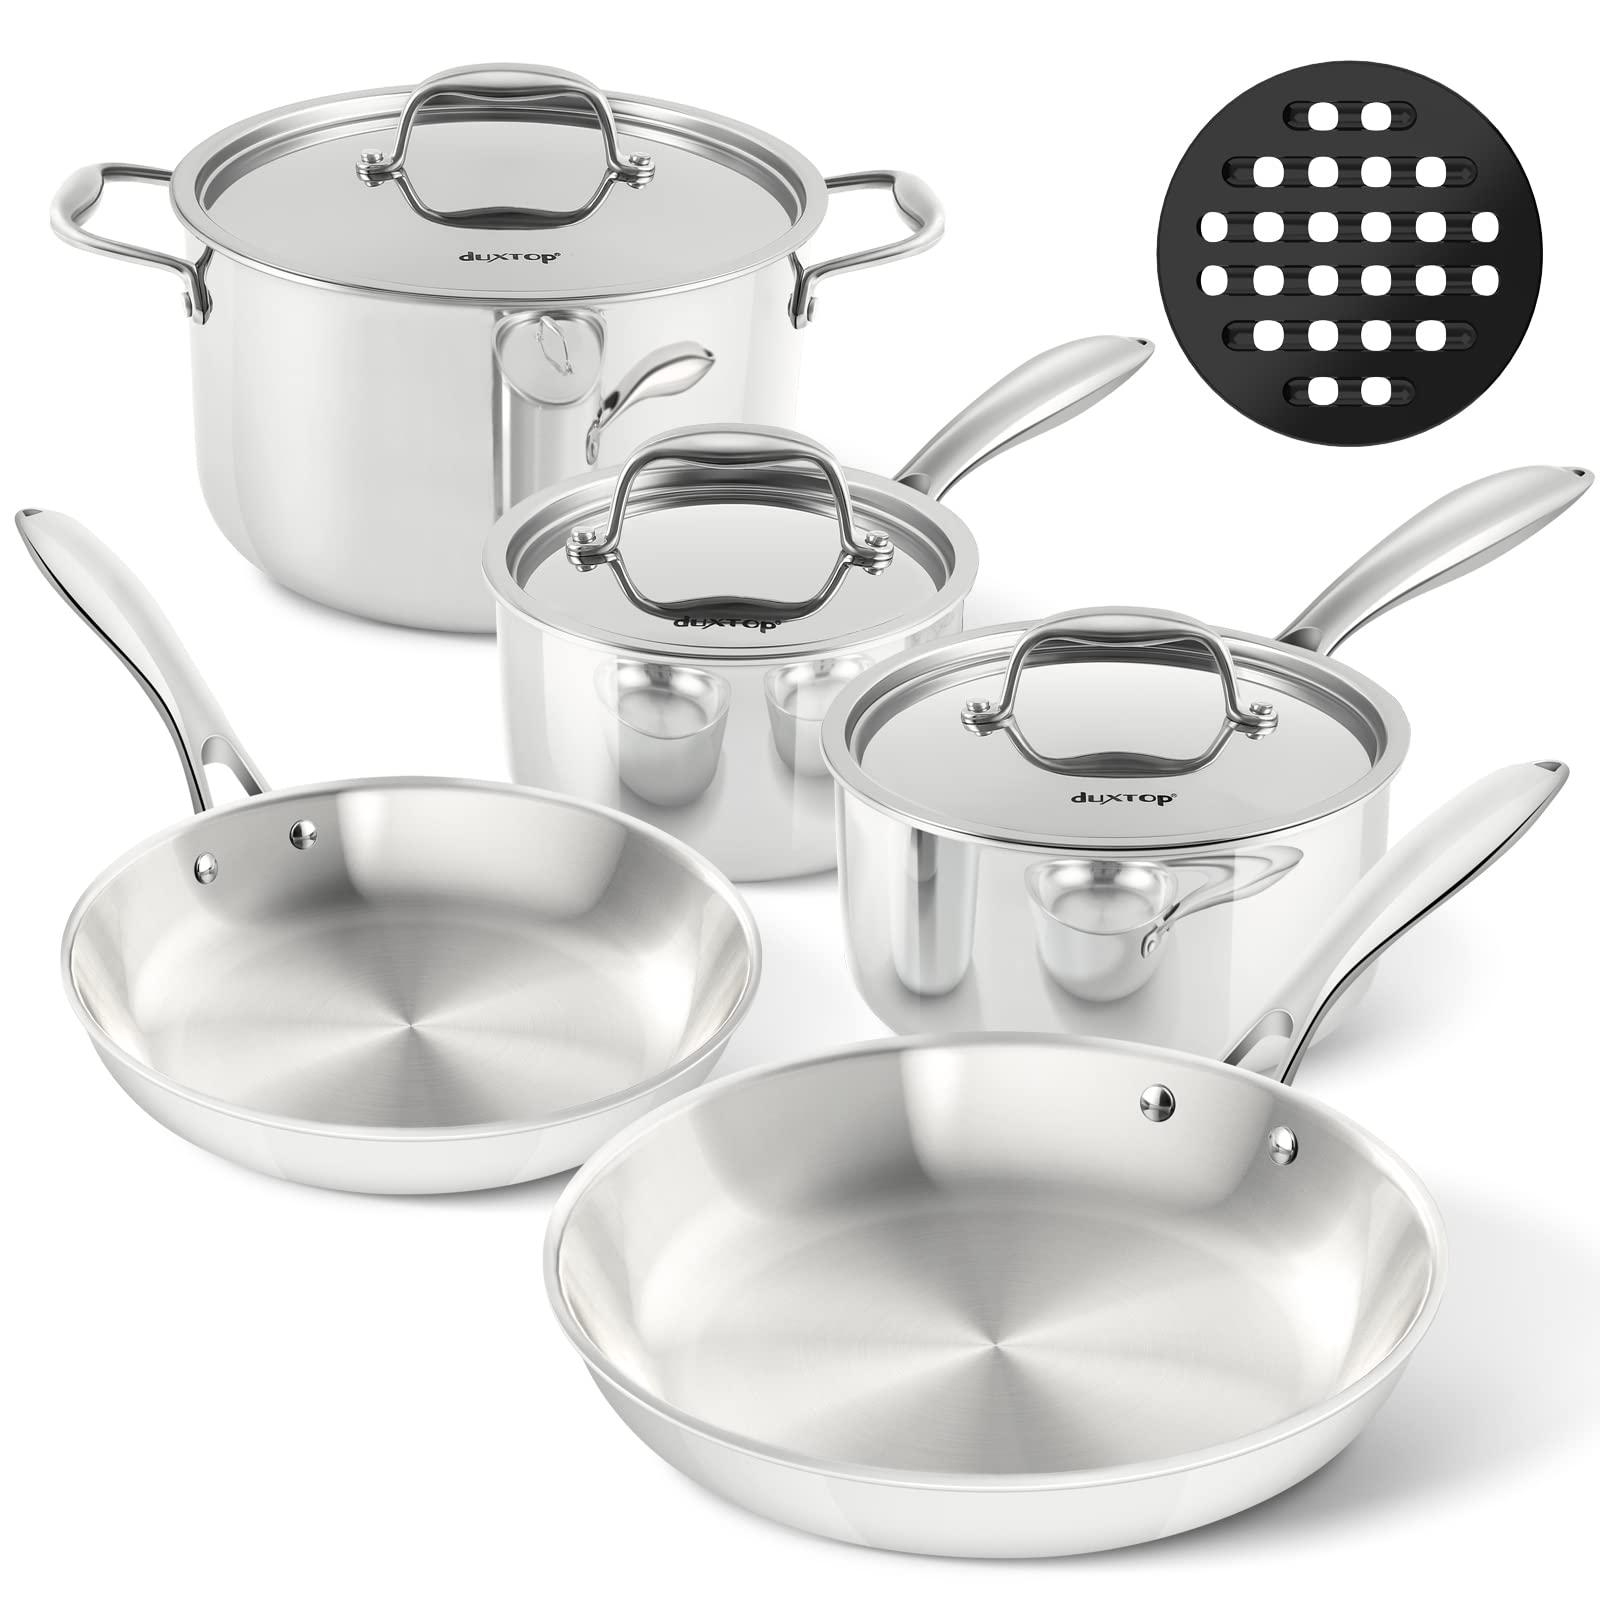 duxtop whole-clad tri-ply stainless steel induction cookware set, 9pc kitchen pots and pans set